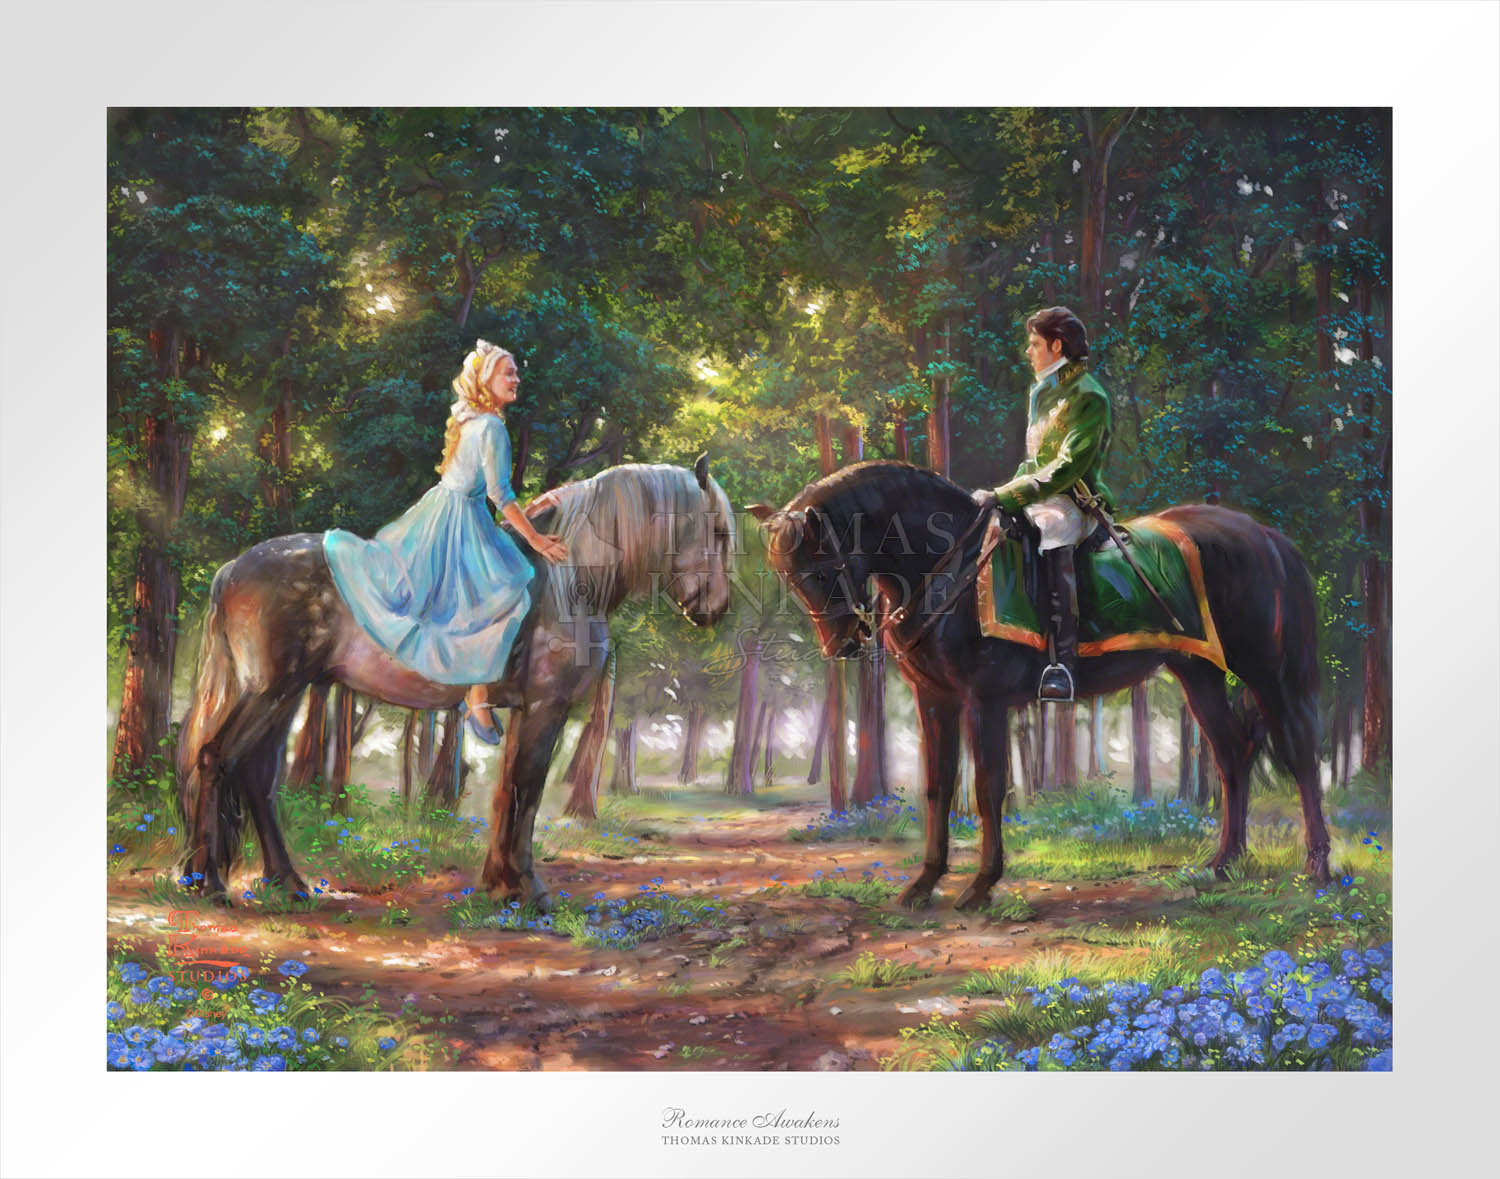 Cinderella-Ella meets "The Prince" for the first time. The two happen to meet in the forest as The Prince is on a stag hunt, and Ella is on a ride of her own.